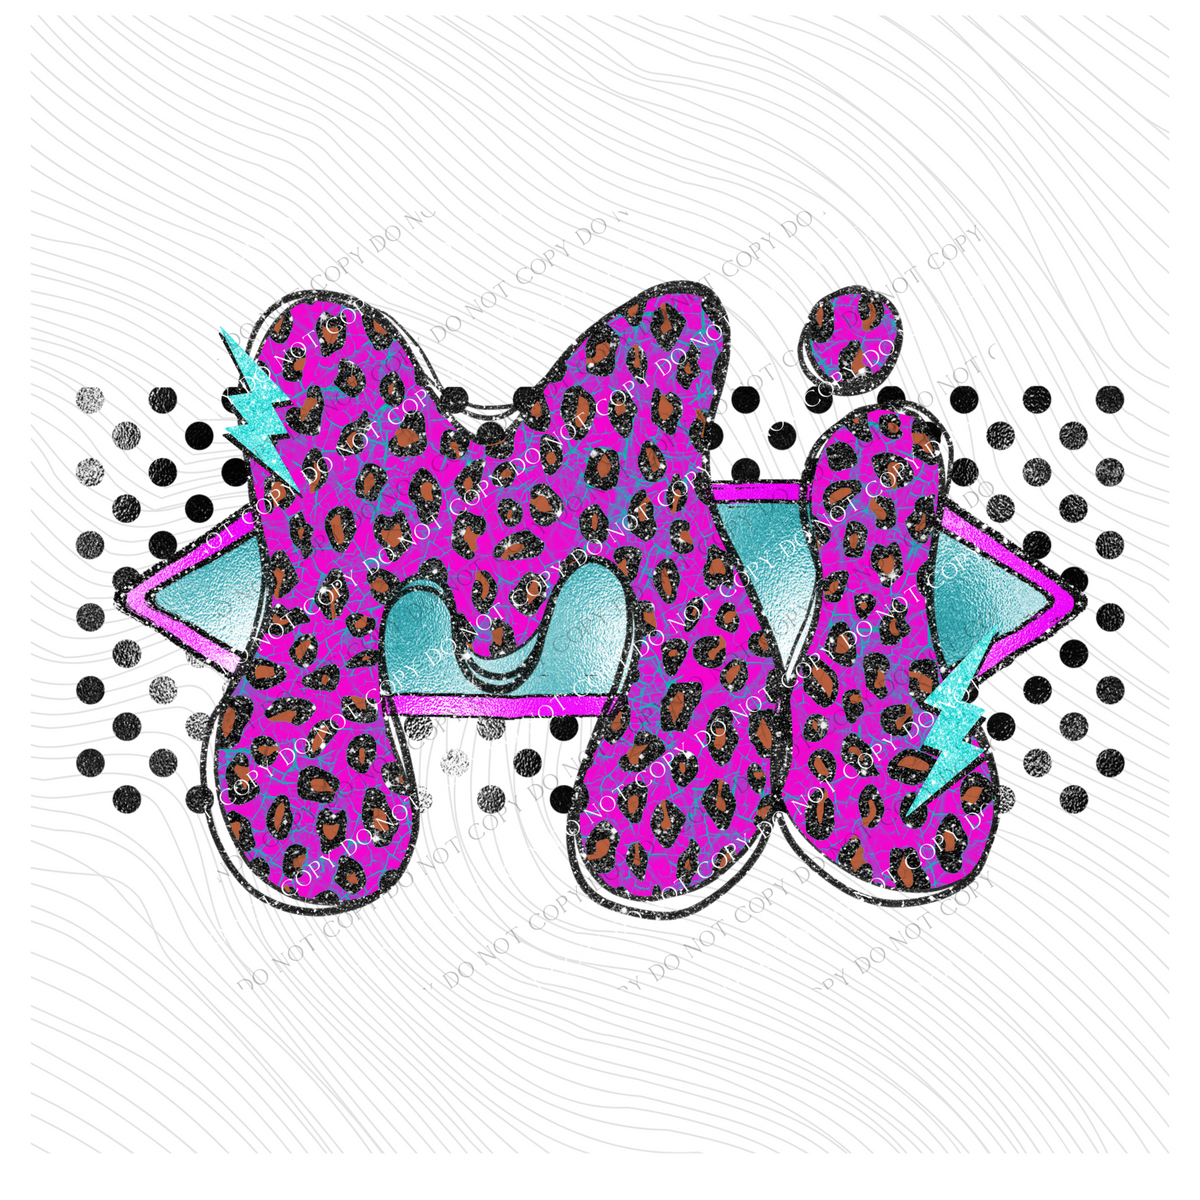 Michigan Vintage Mermaid Cracked Marbled Leopard with Black Glitter and Foil in Bright Purple, Pinks & Turquoise Digital Design, PNG